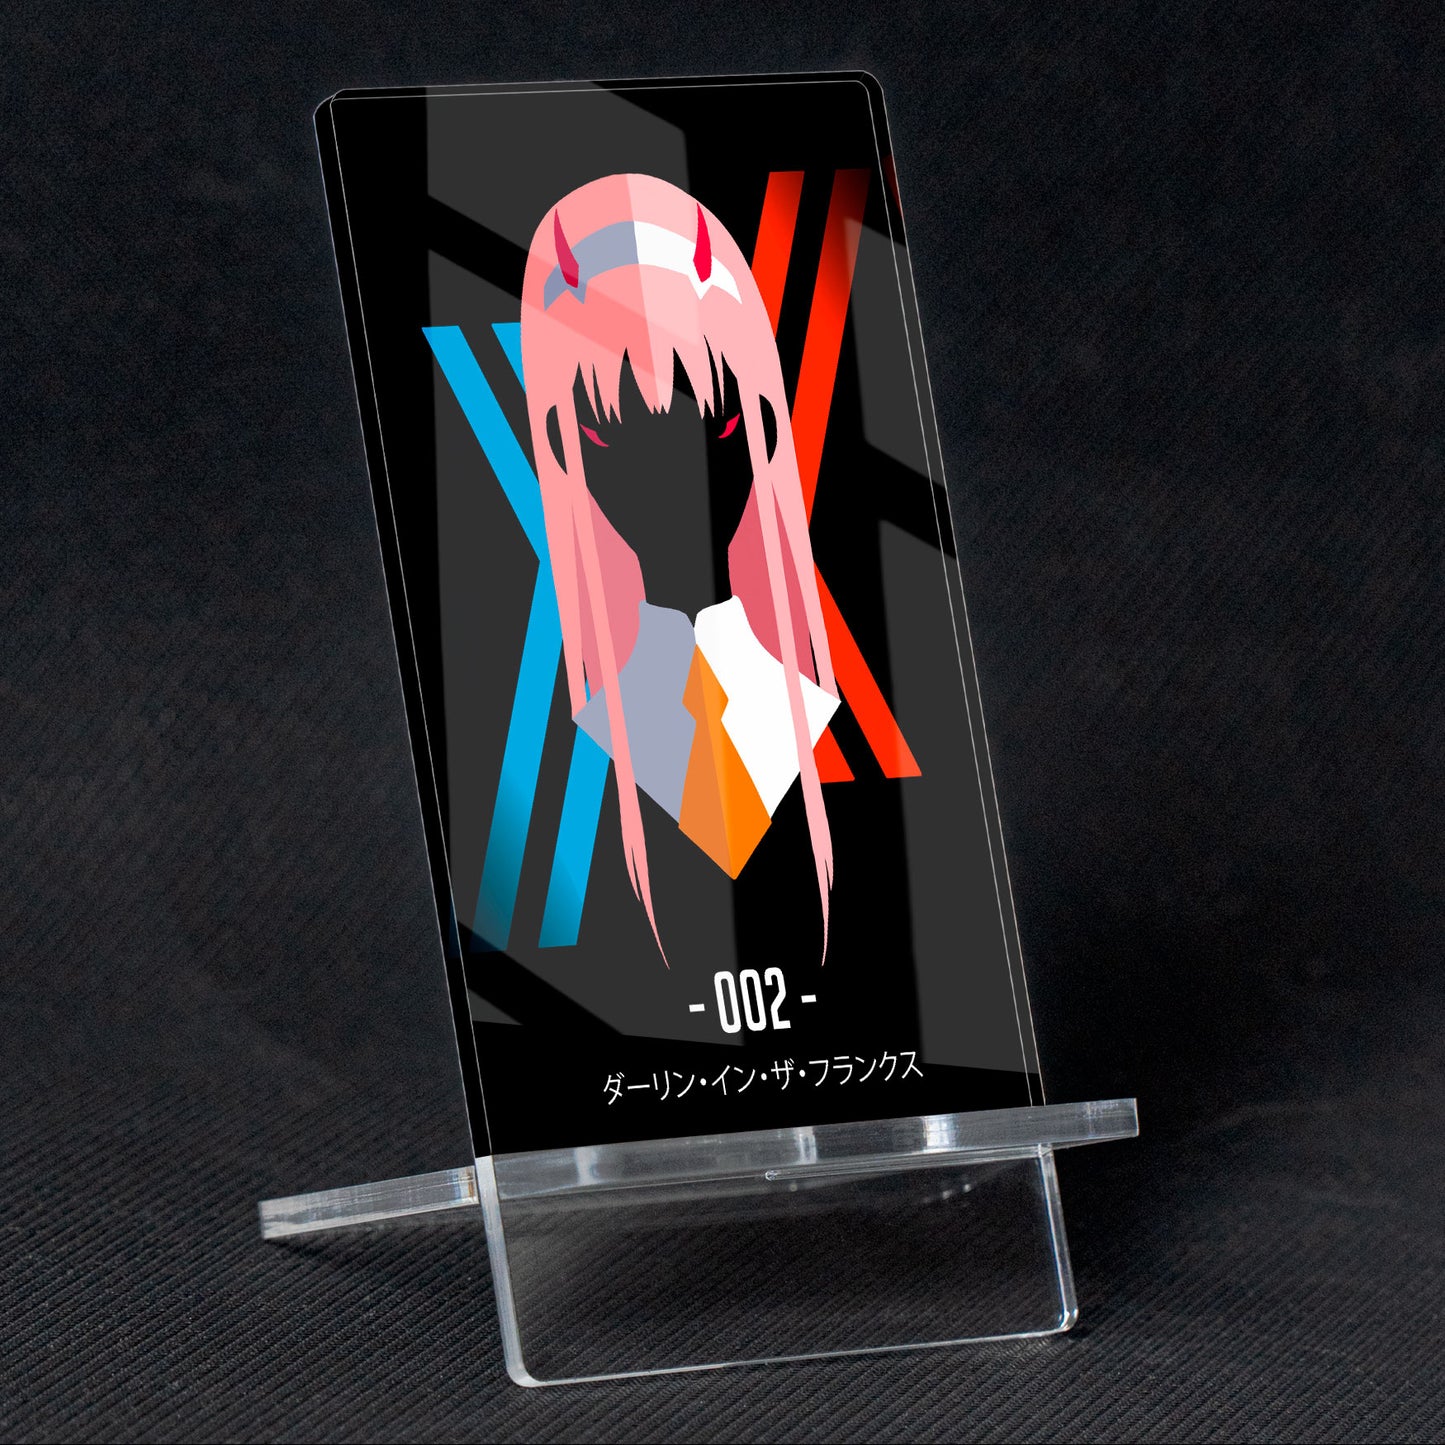 Darling in the Franxx Zero Two "002" Phone Holder, methacrylate